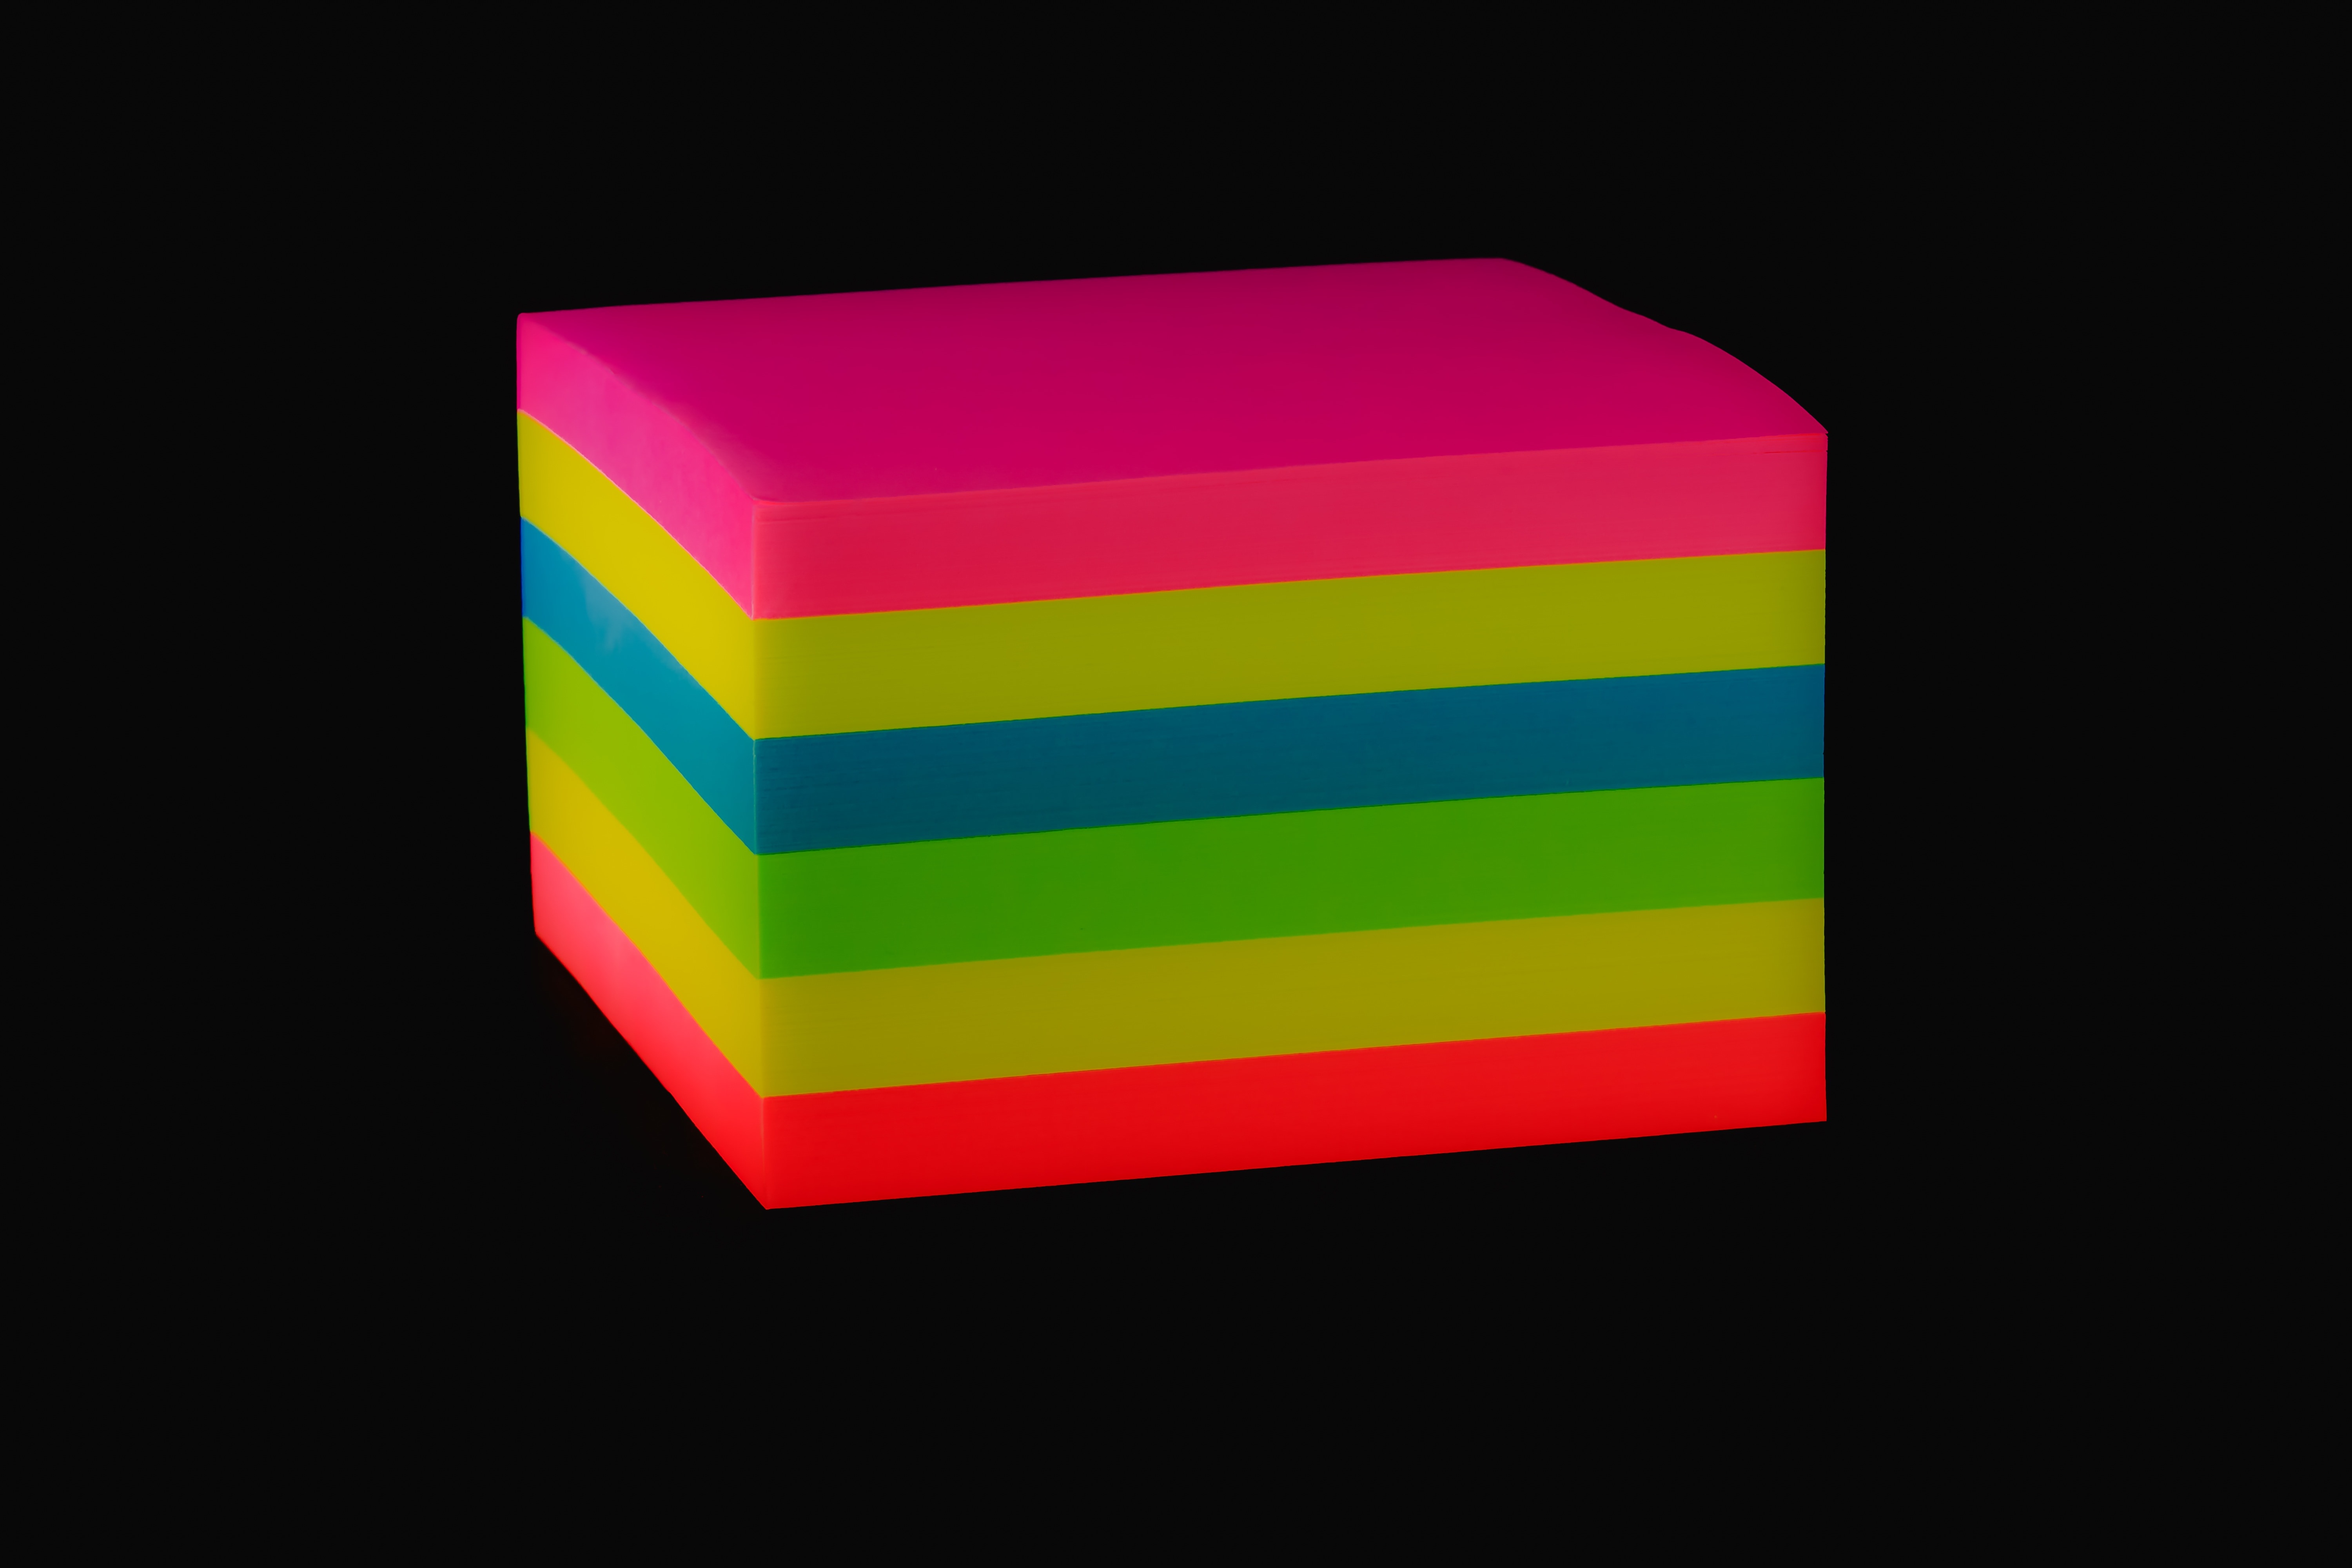 pink green blue yellow and red cube illustration